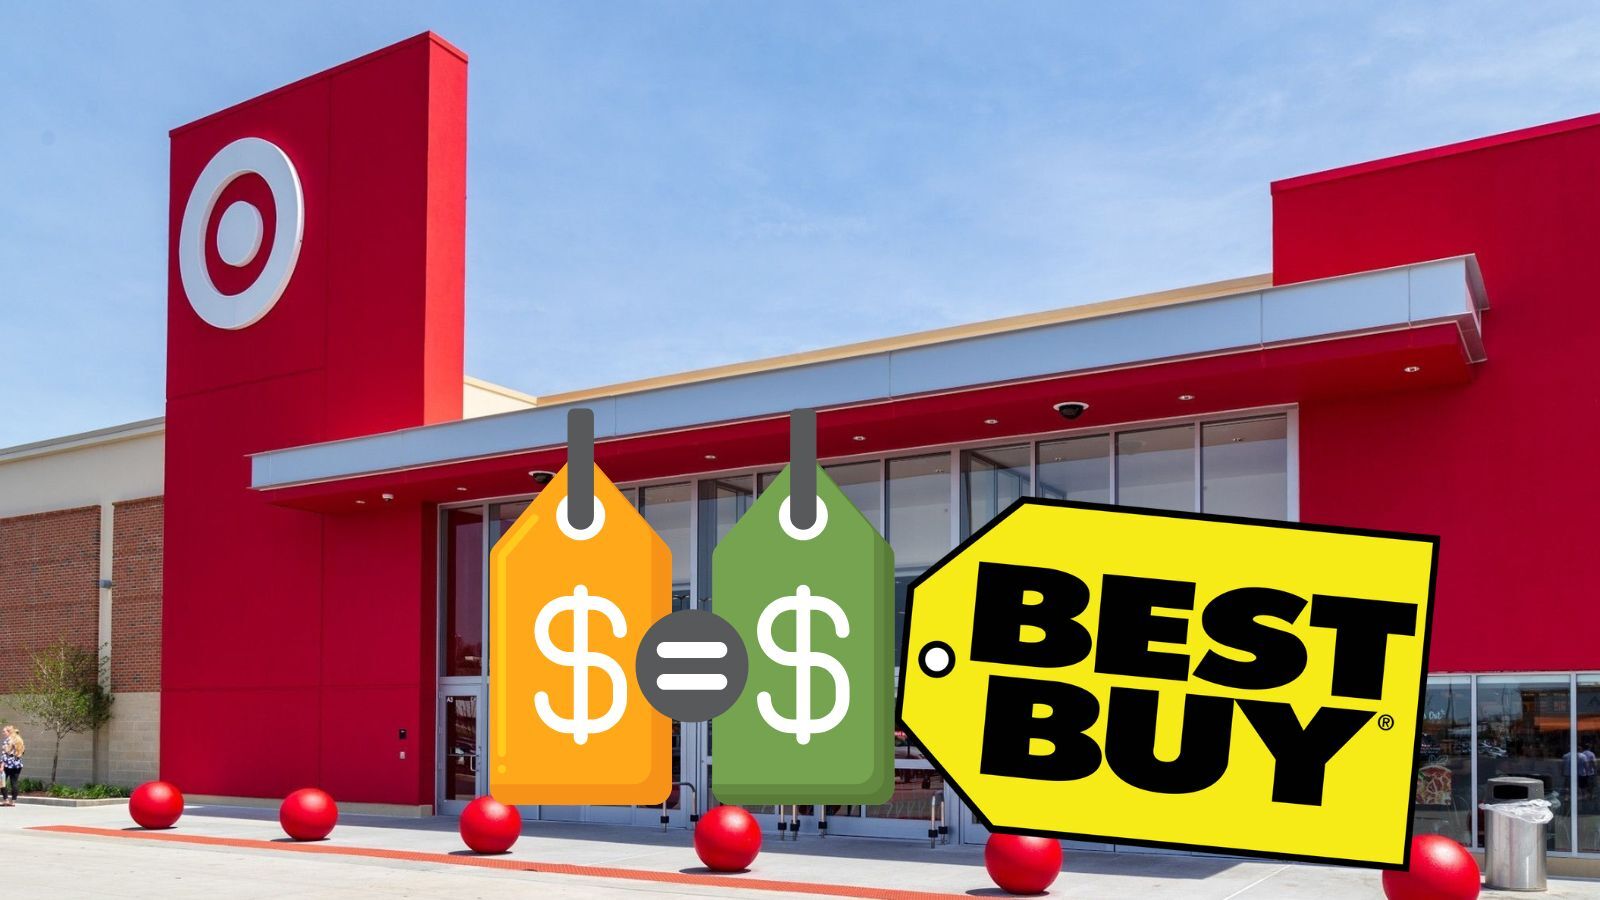 Does Target Price Match Best Buy? (Here Is the Detailed Guide)